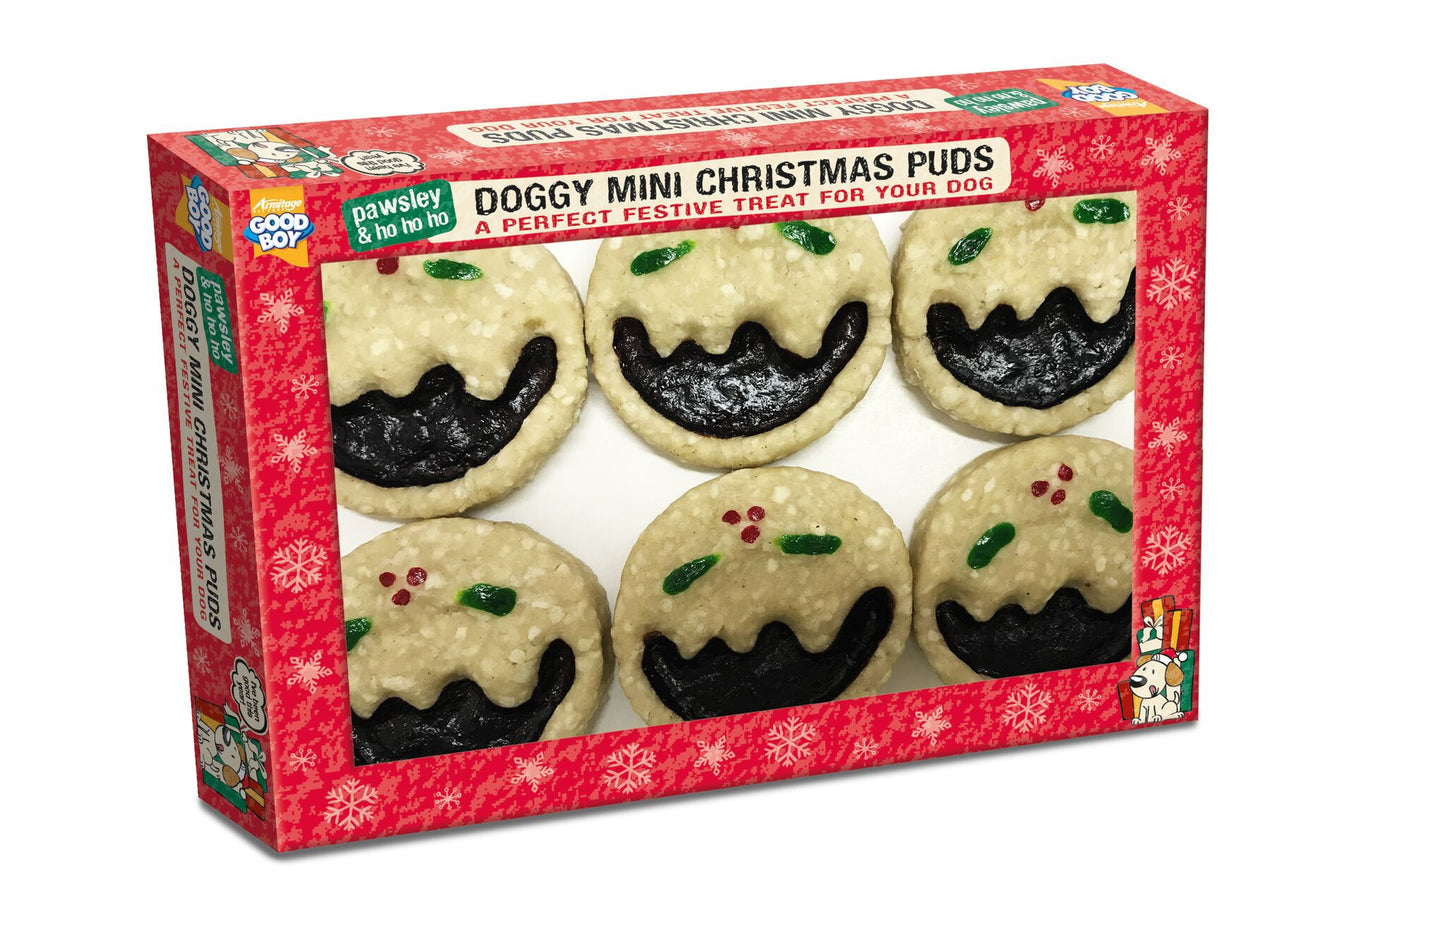 Good Boy Doggy Mini Christmas Puds Pack of 6